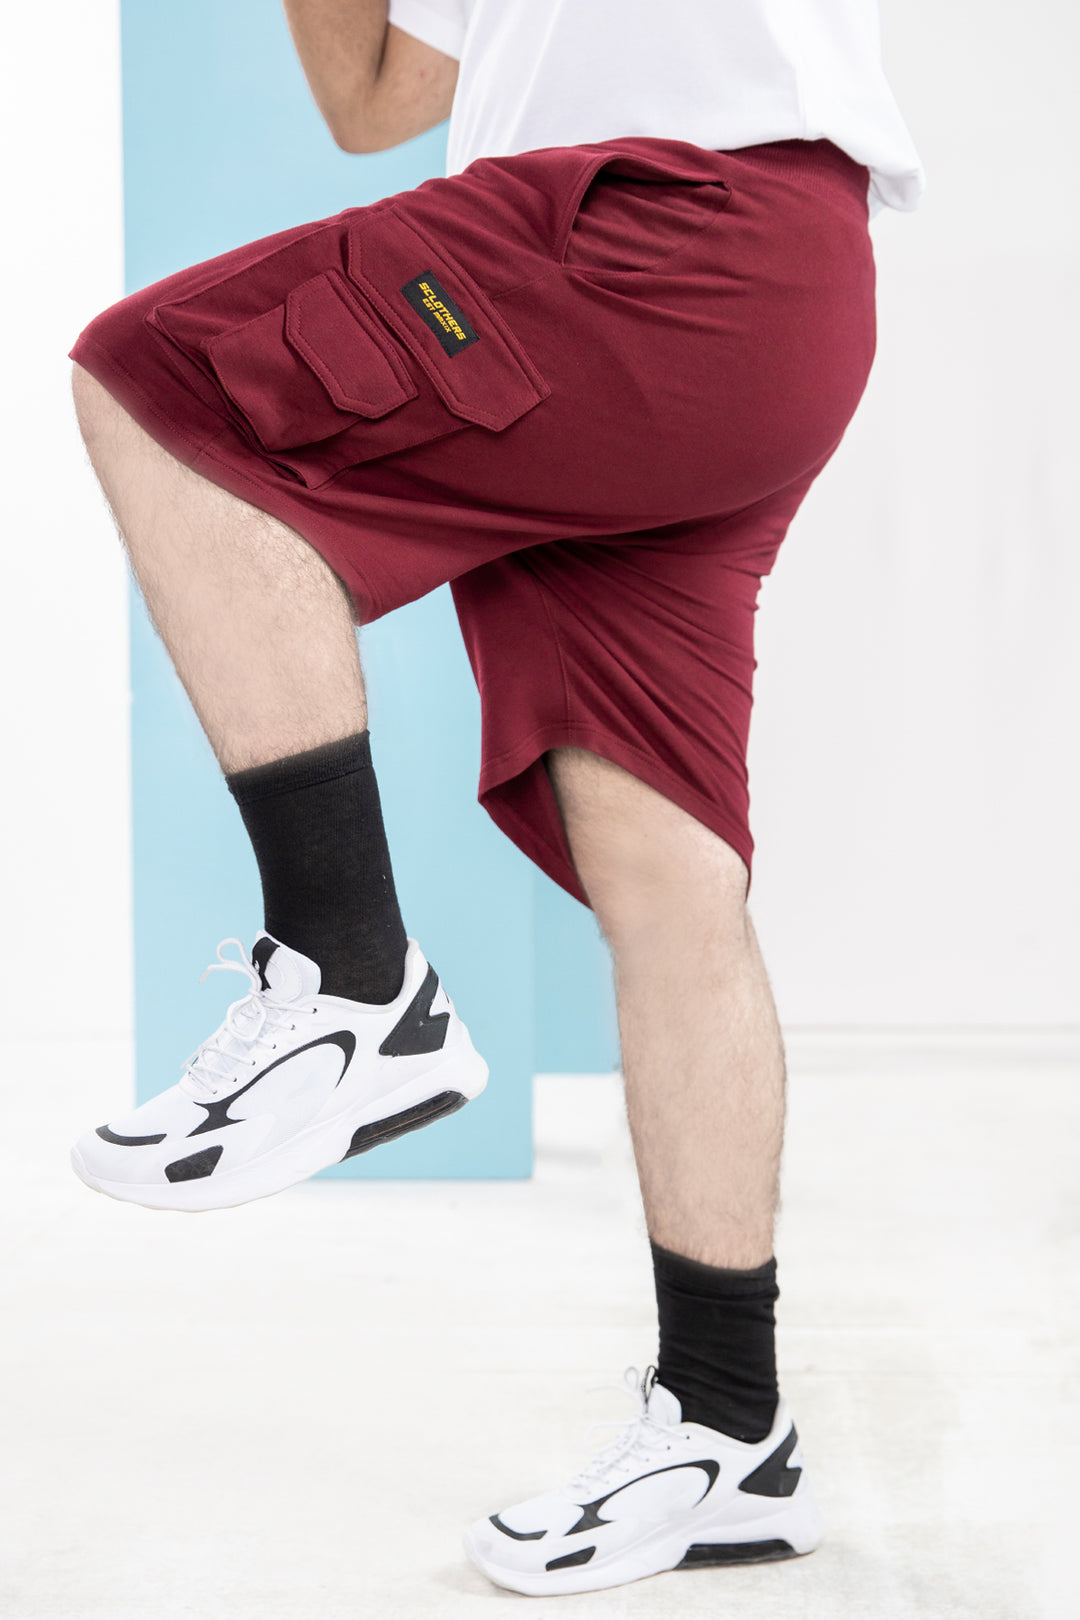 Maroon Cargo Shorts (Plus Size) - S21 - MSH011P